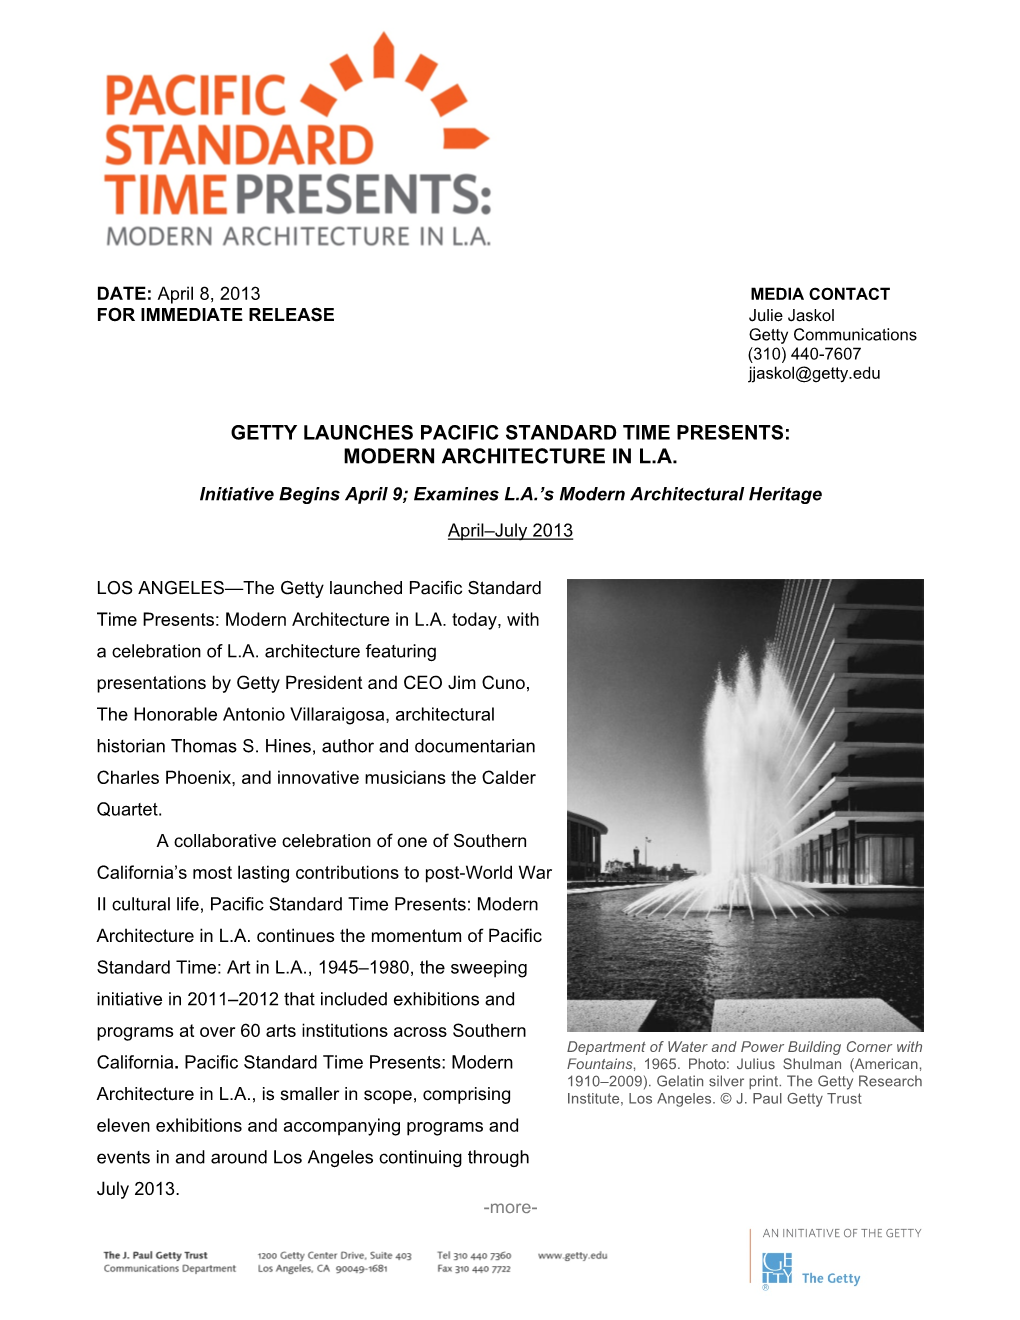 Pacific Standard Time Presents: Modern Architecture in L.A